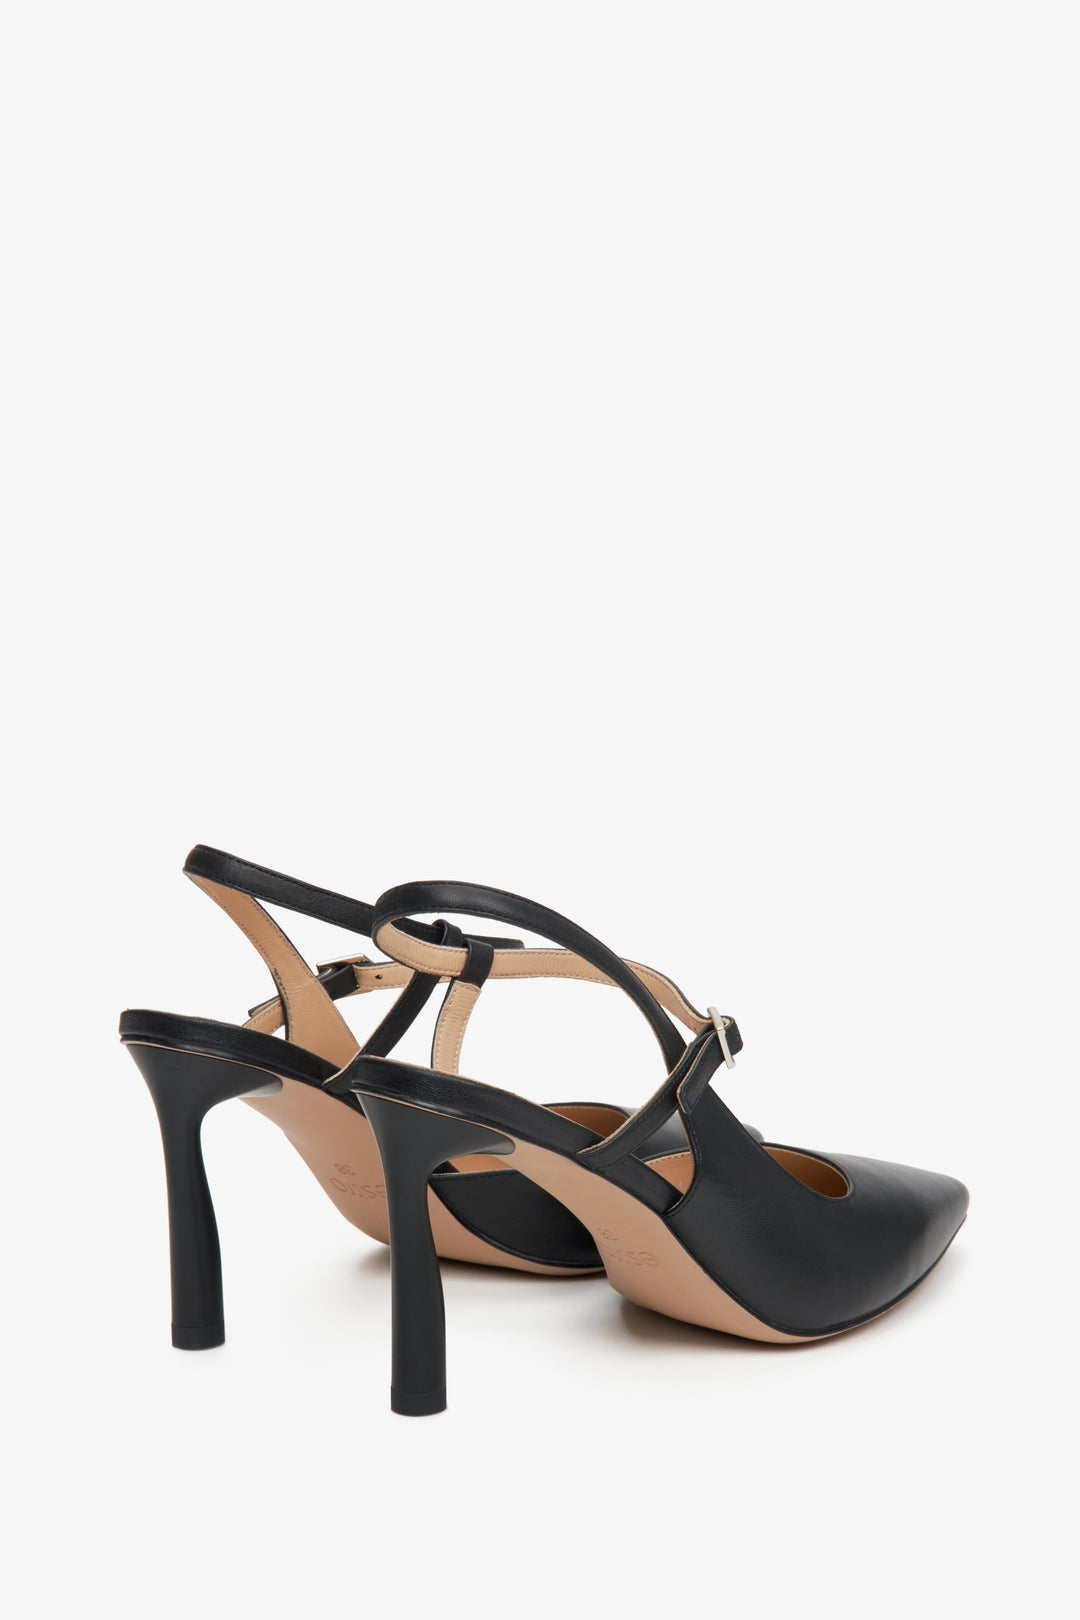 Women's slingback high heels in black made of natural leather Estro - a close-up on heel.